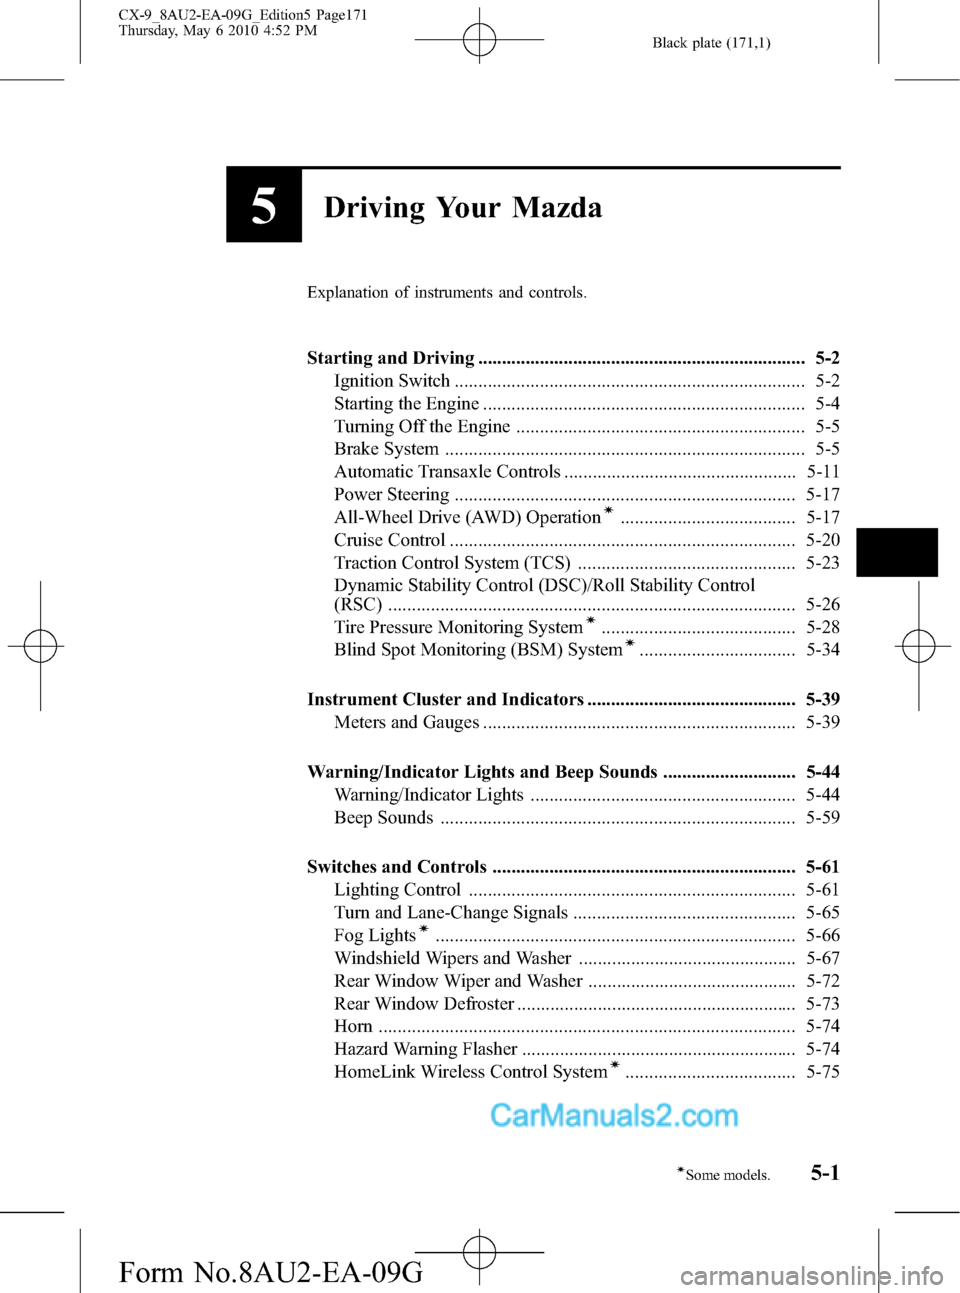 MAZDA MODEL CX-9 2010  Owners Manual (in English) Black plate (171,1)
5Driving Your Mazda
Explanation of instruments and controls.
Starting and Driving ..................................................................... 5-2
Ignition Switch ........